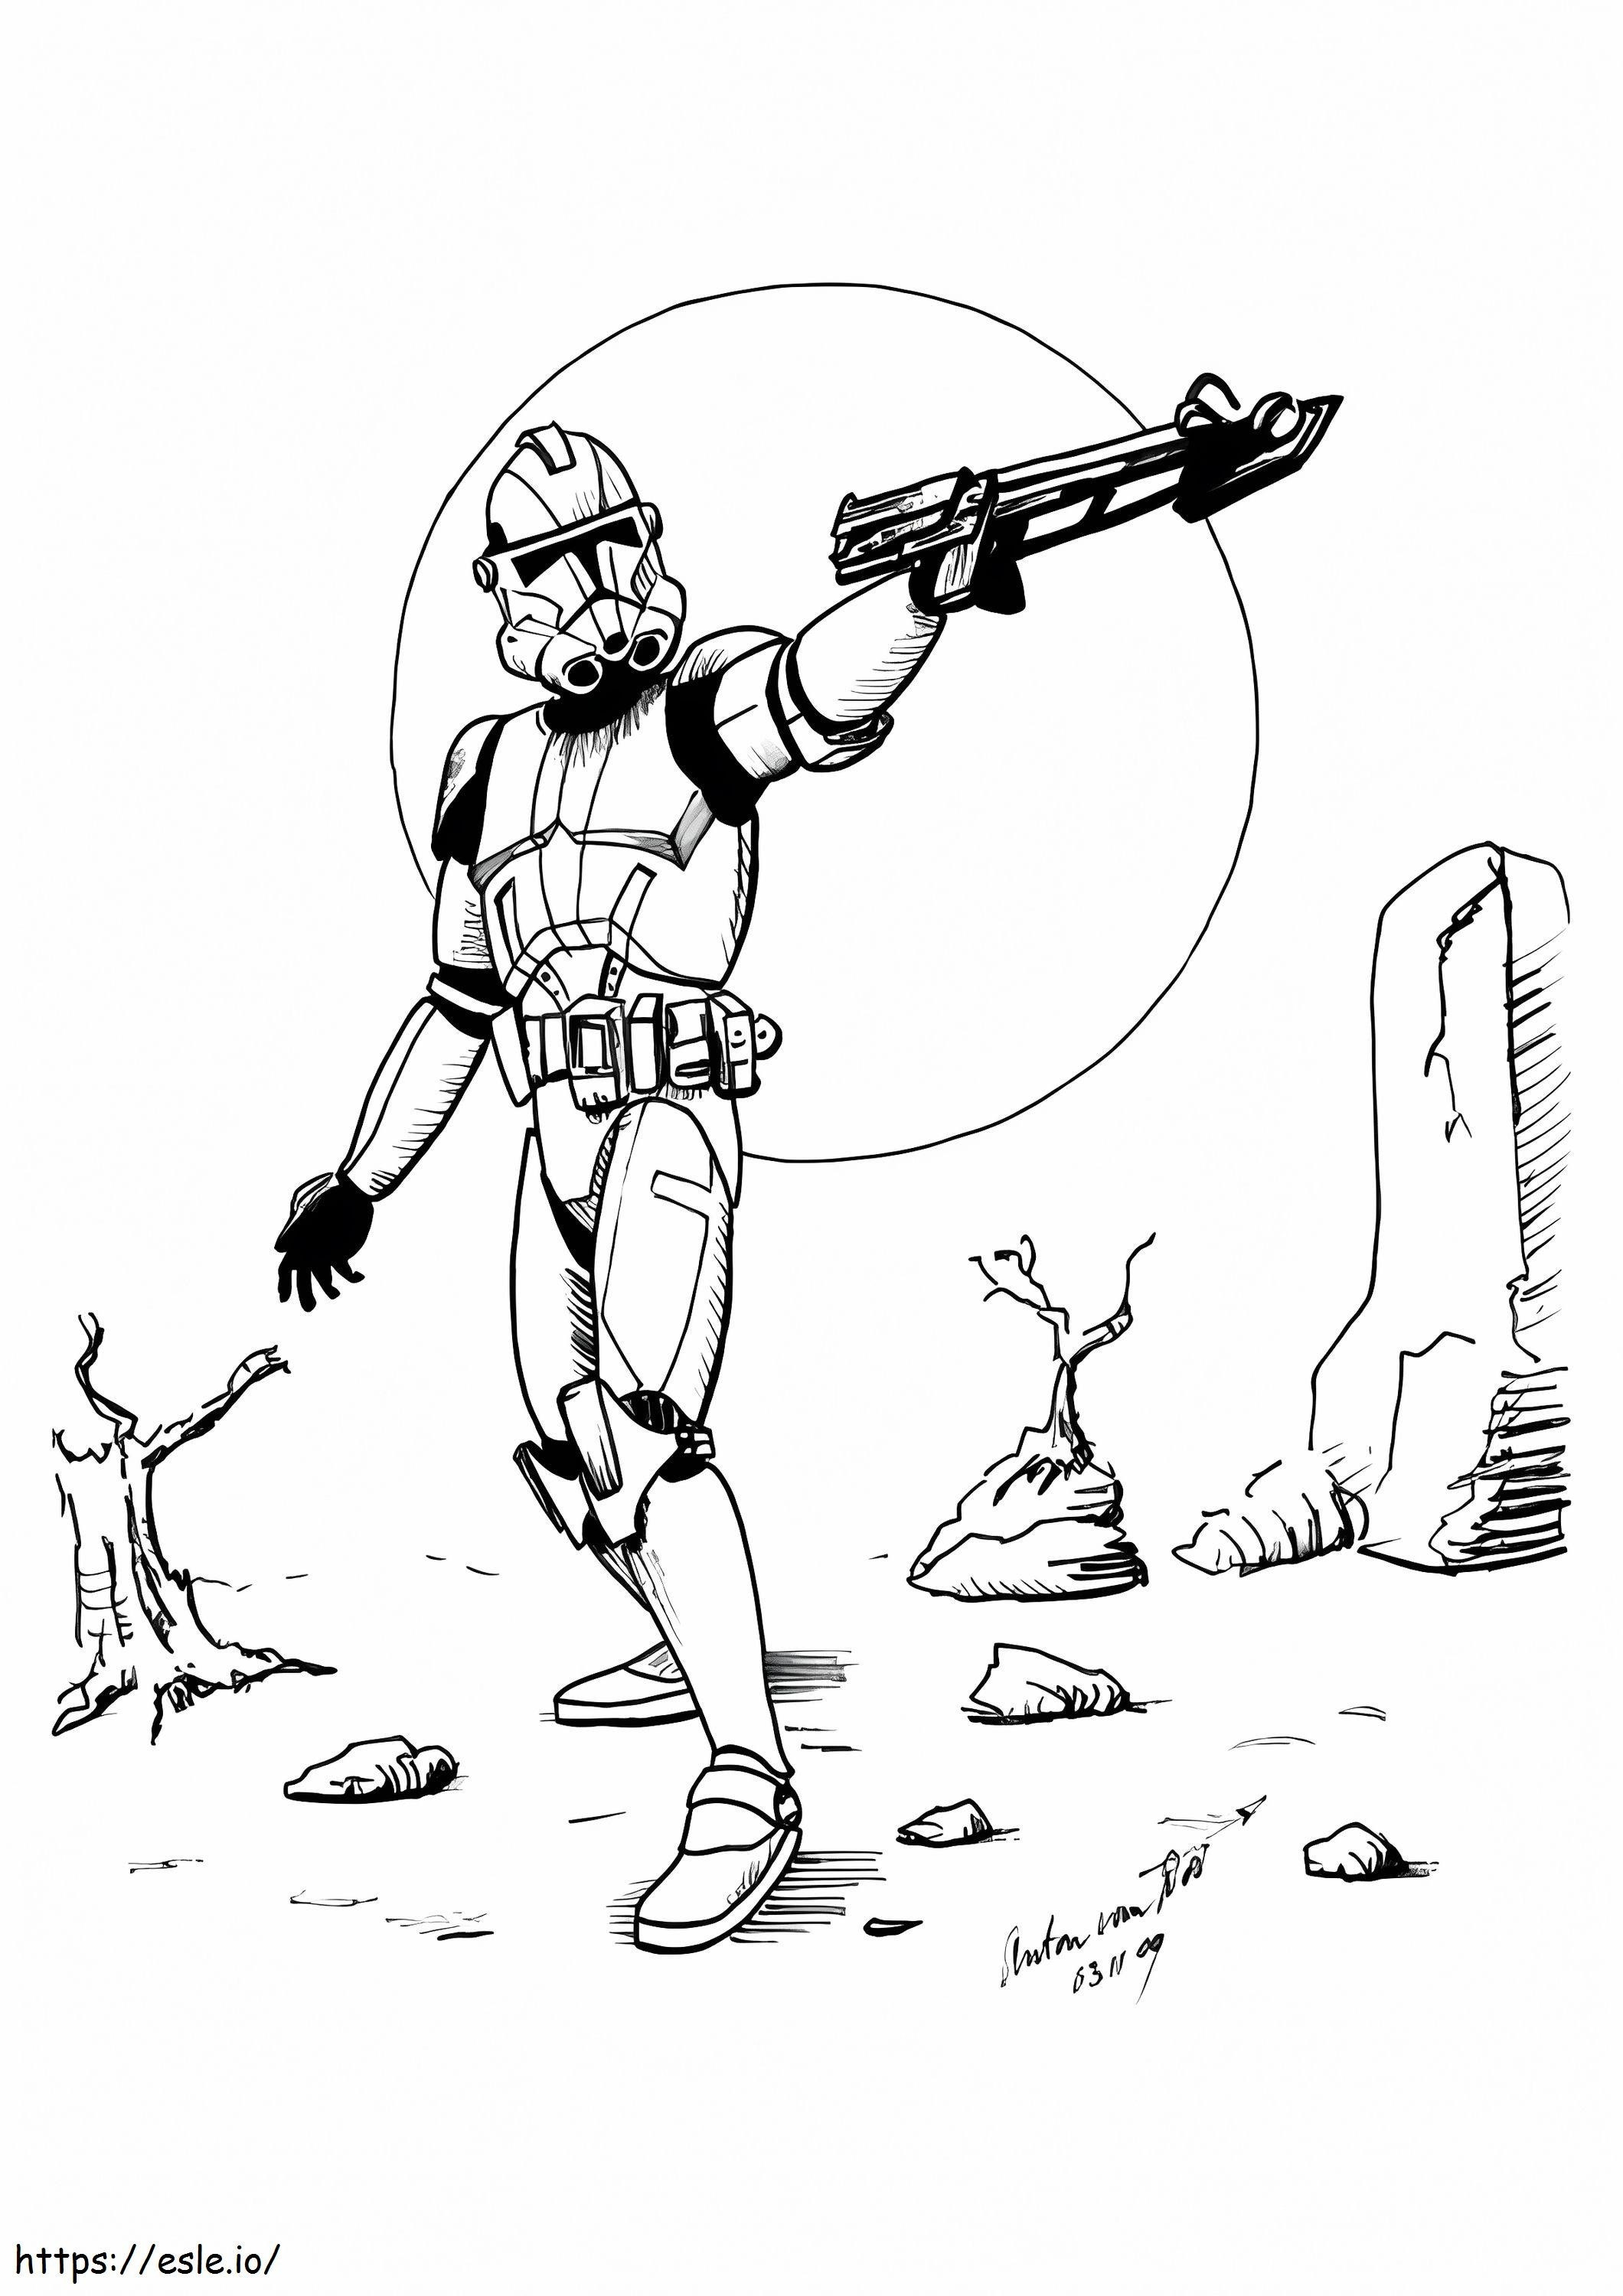 The Storm Troopers A4 coloring page